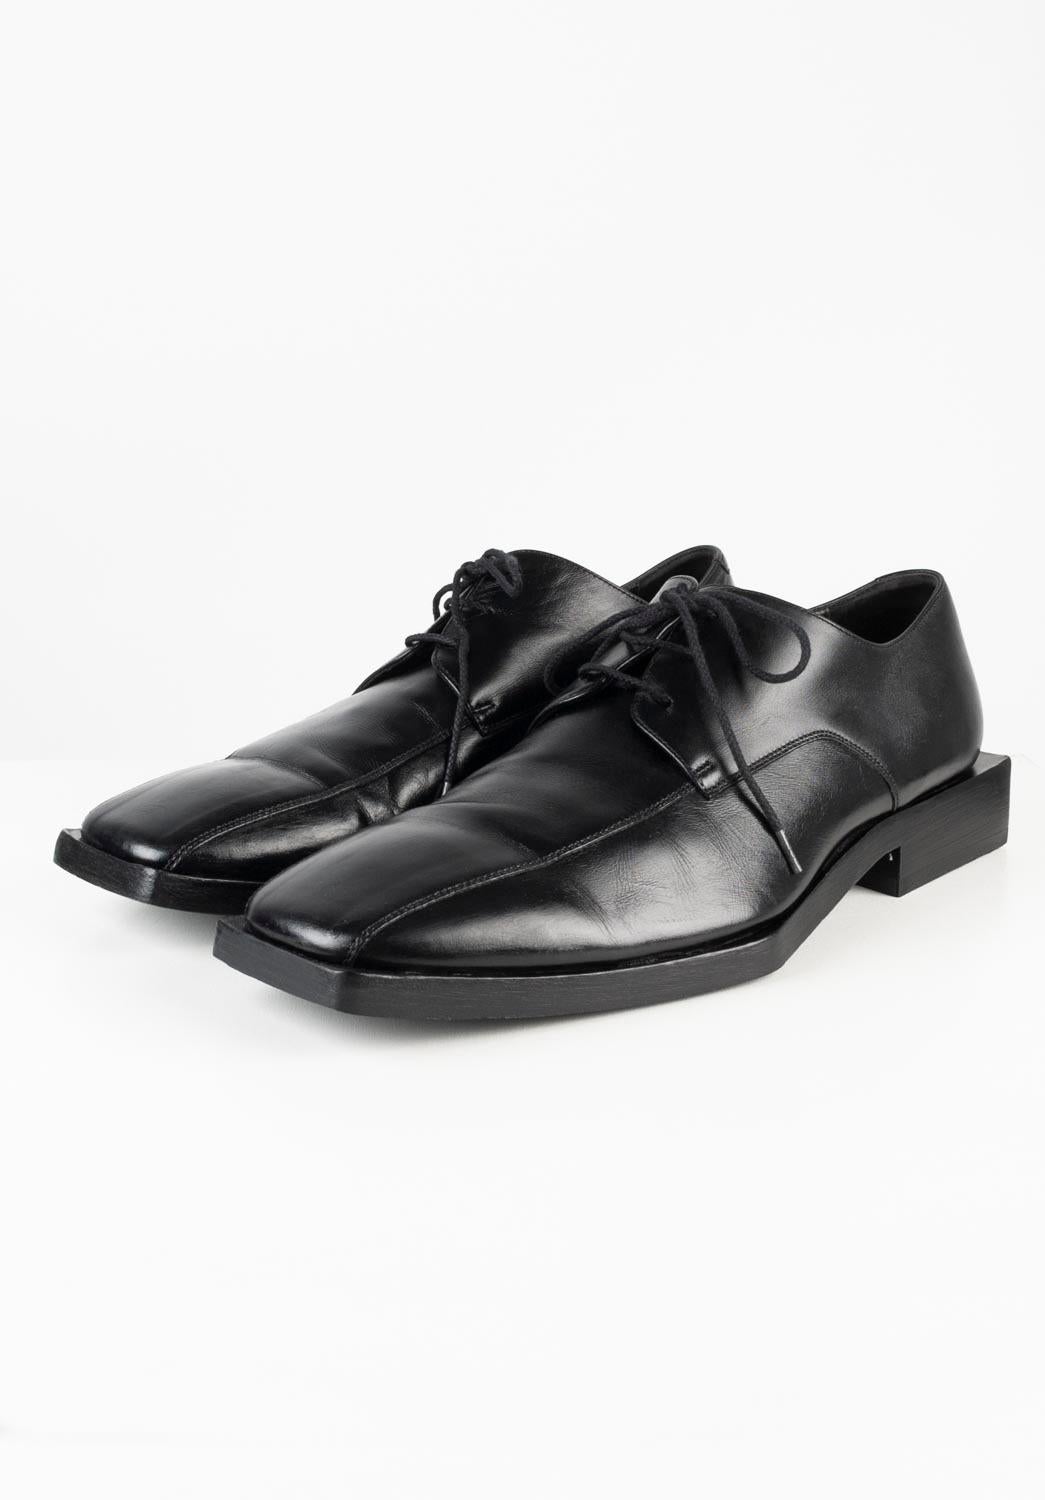 100% genuine Balenciaga Men Derbies, S583
Color: black
(An actual color may a bit vary due to individual computer screen interpretation)
Material: leather
Tag size: EUR 45, UK10, USA11
These shoes are great quality item. Rate 9 of 10, excellent